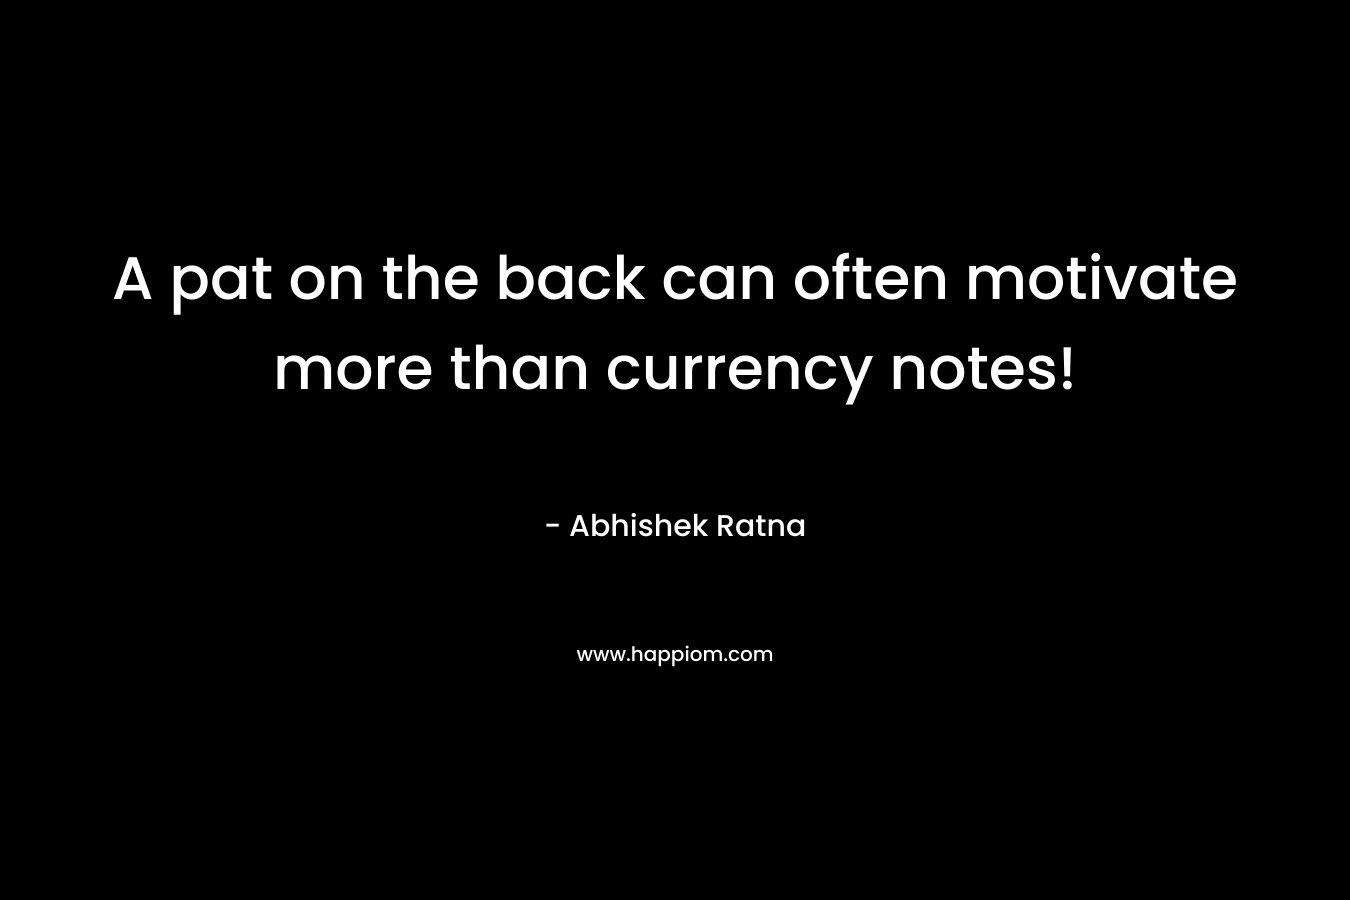 A pat on the back can often motivate more than currency notes!